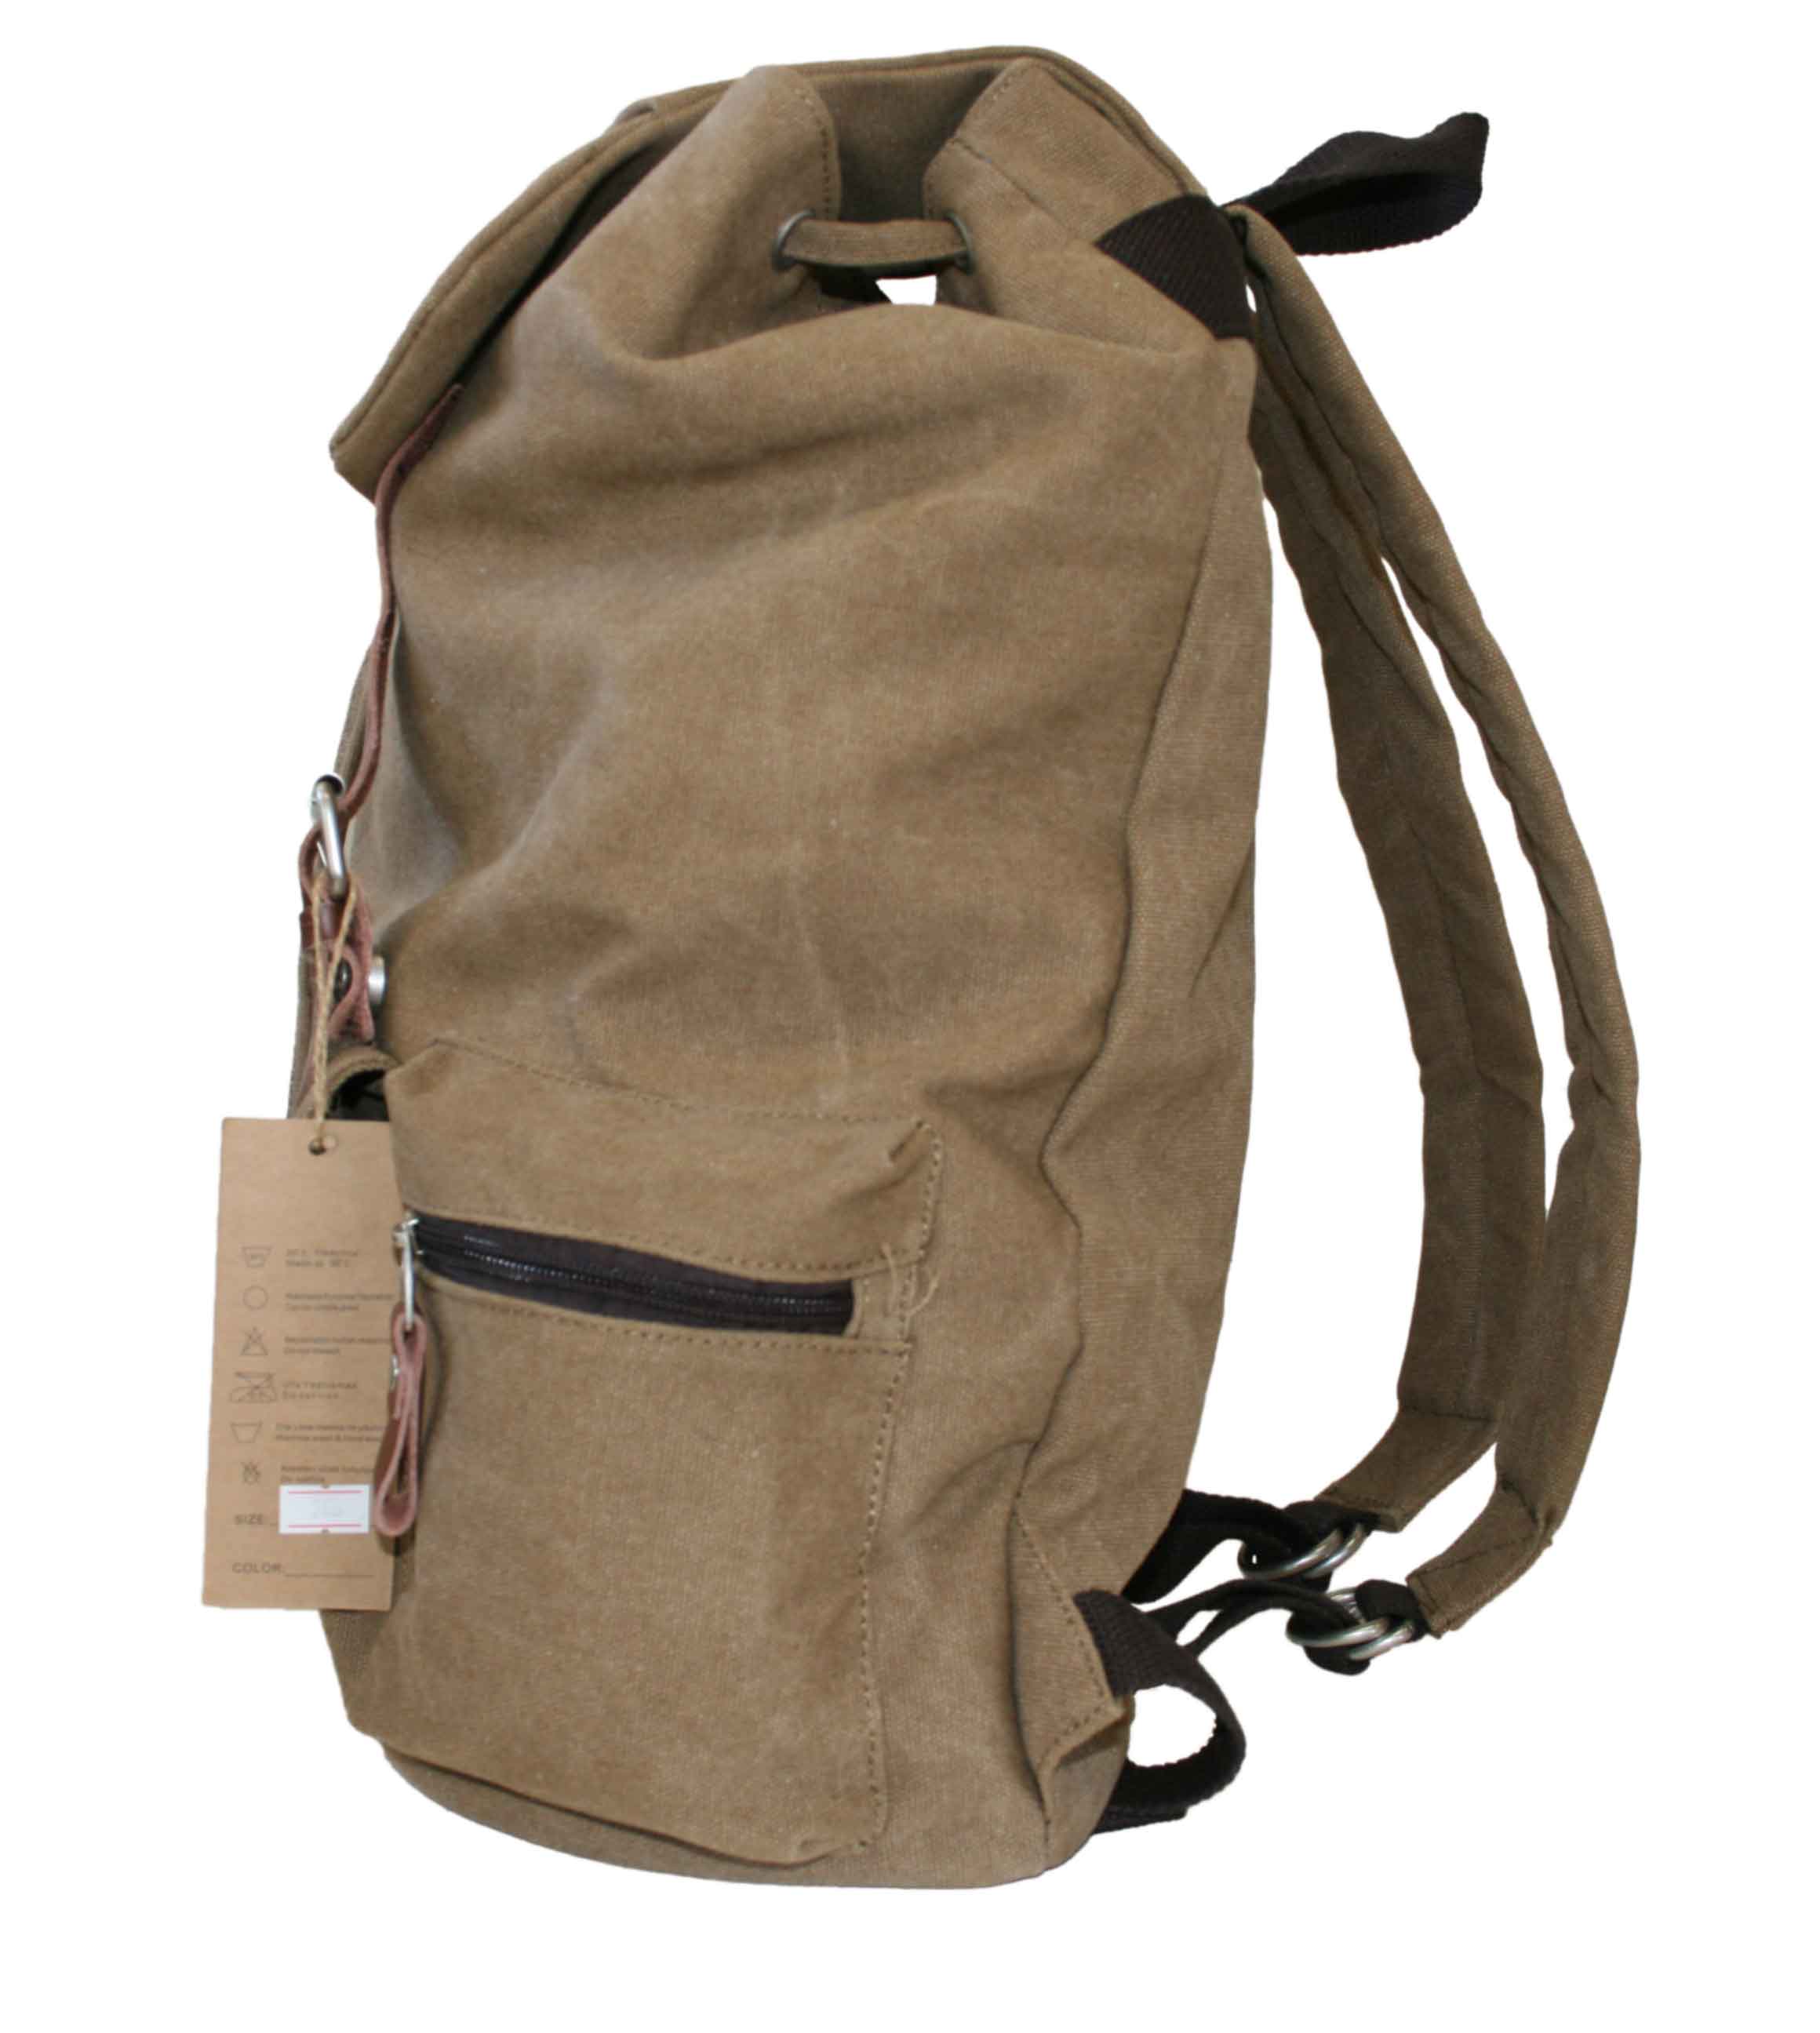 Backpack - Cotton Canvas - Two buckles — Zepter Sports USA